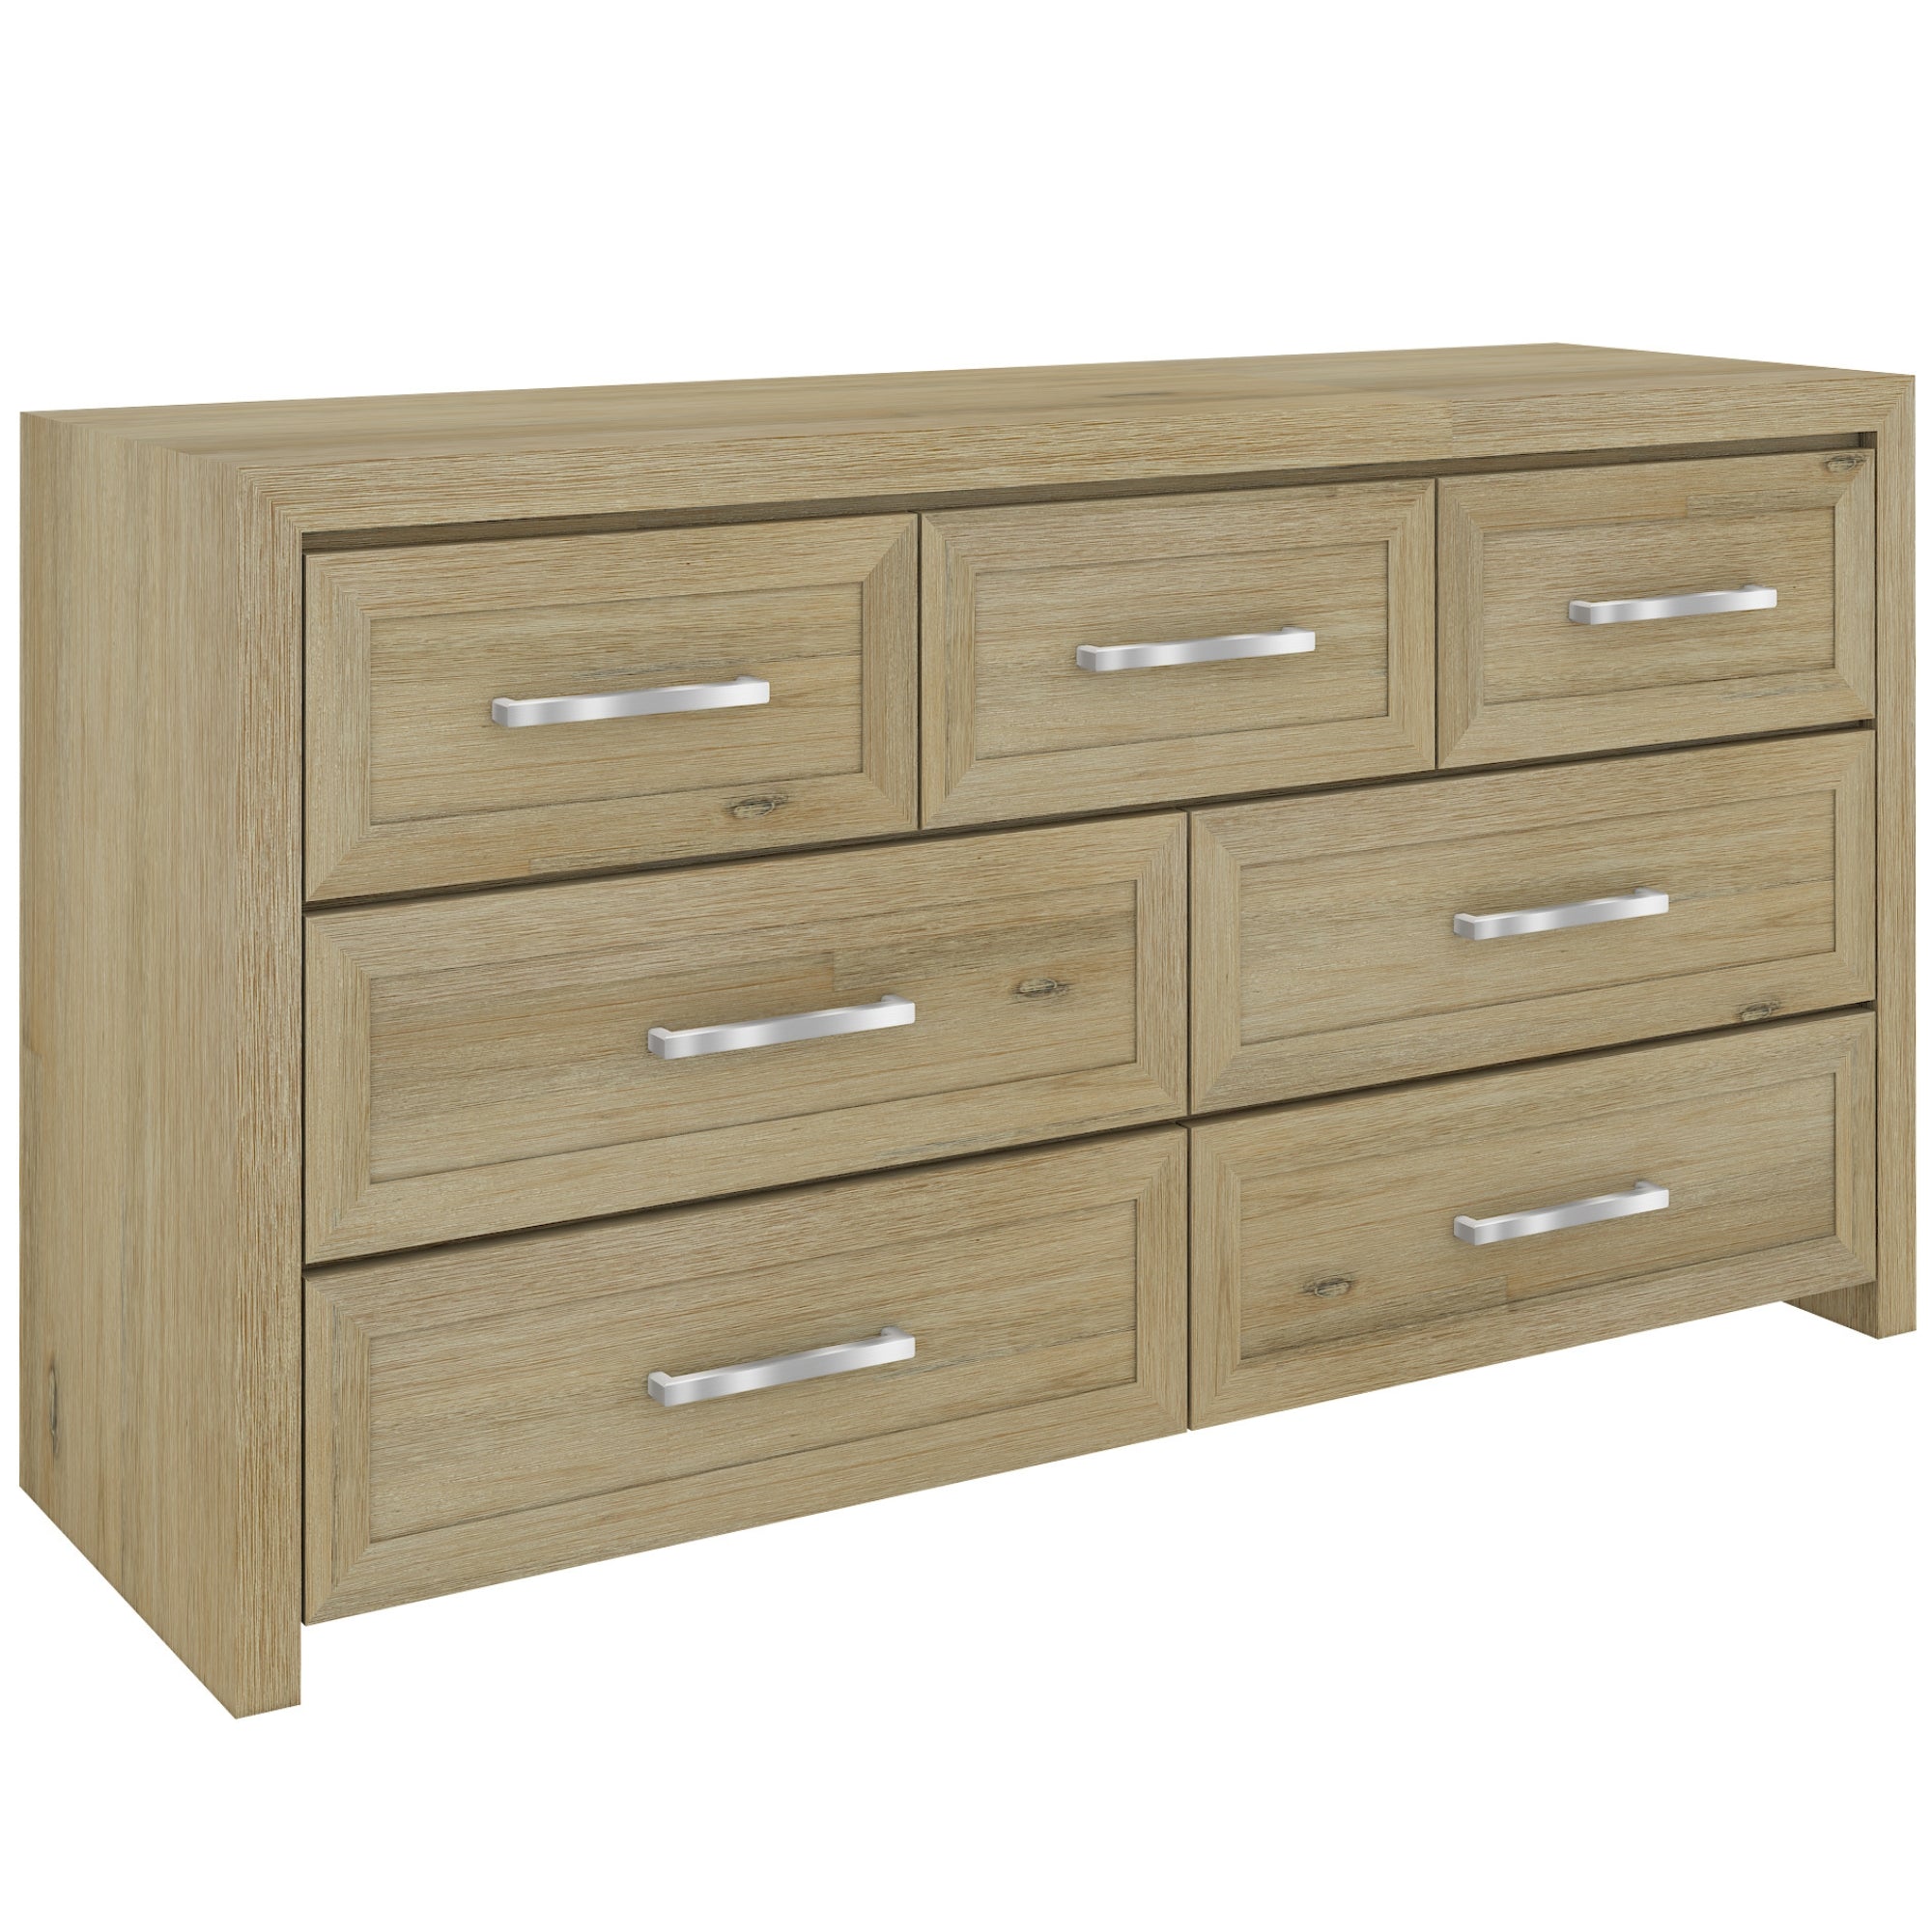 No Assembly Required on this Seven Drawer Lowboy/Dresser - Smoke